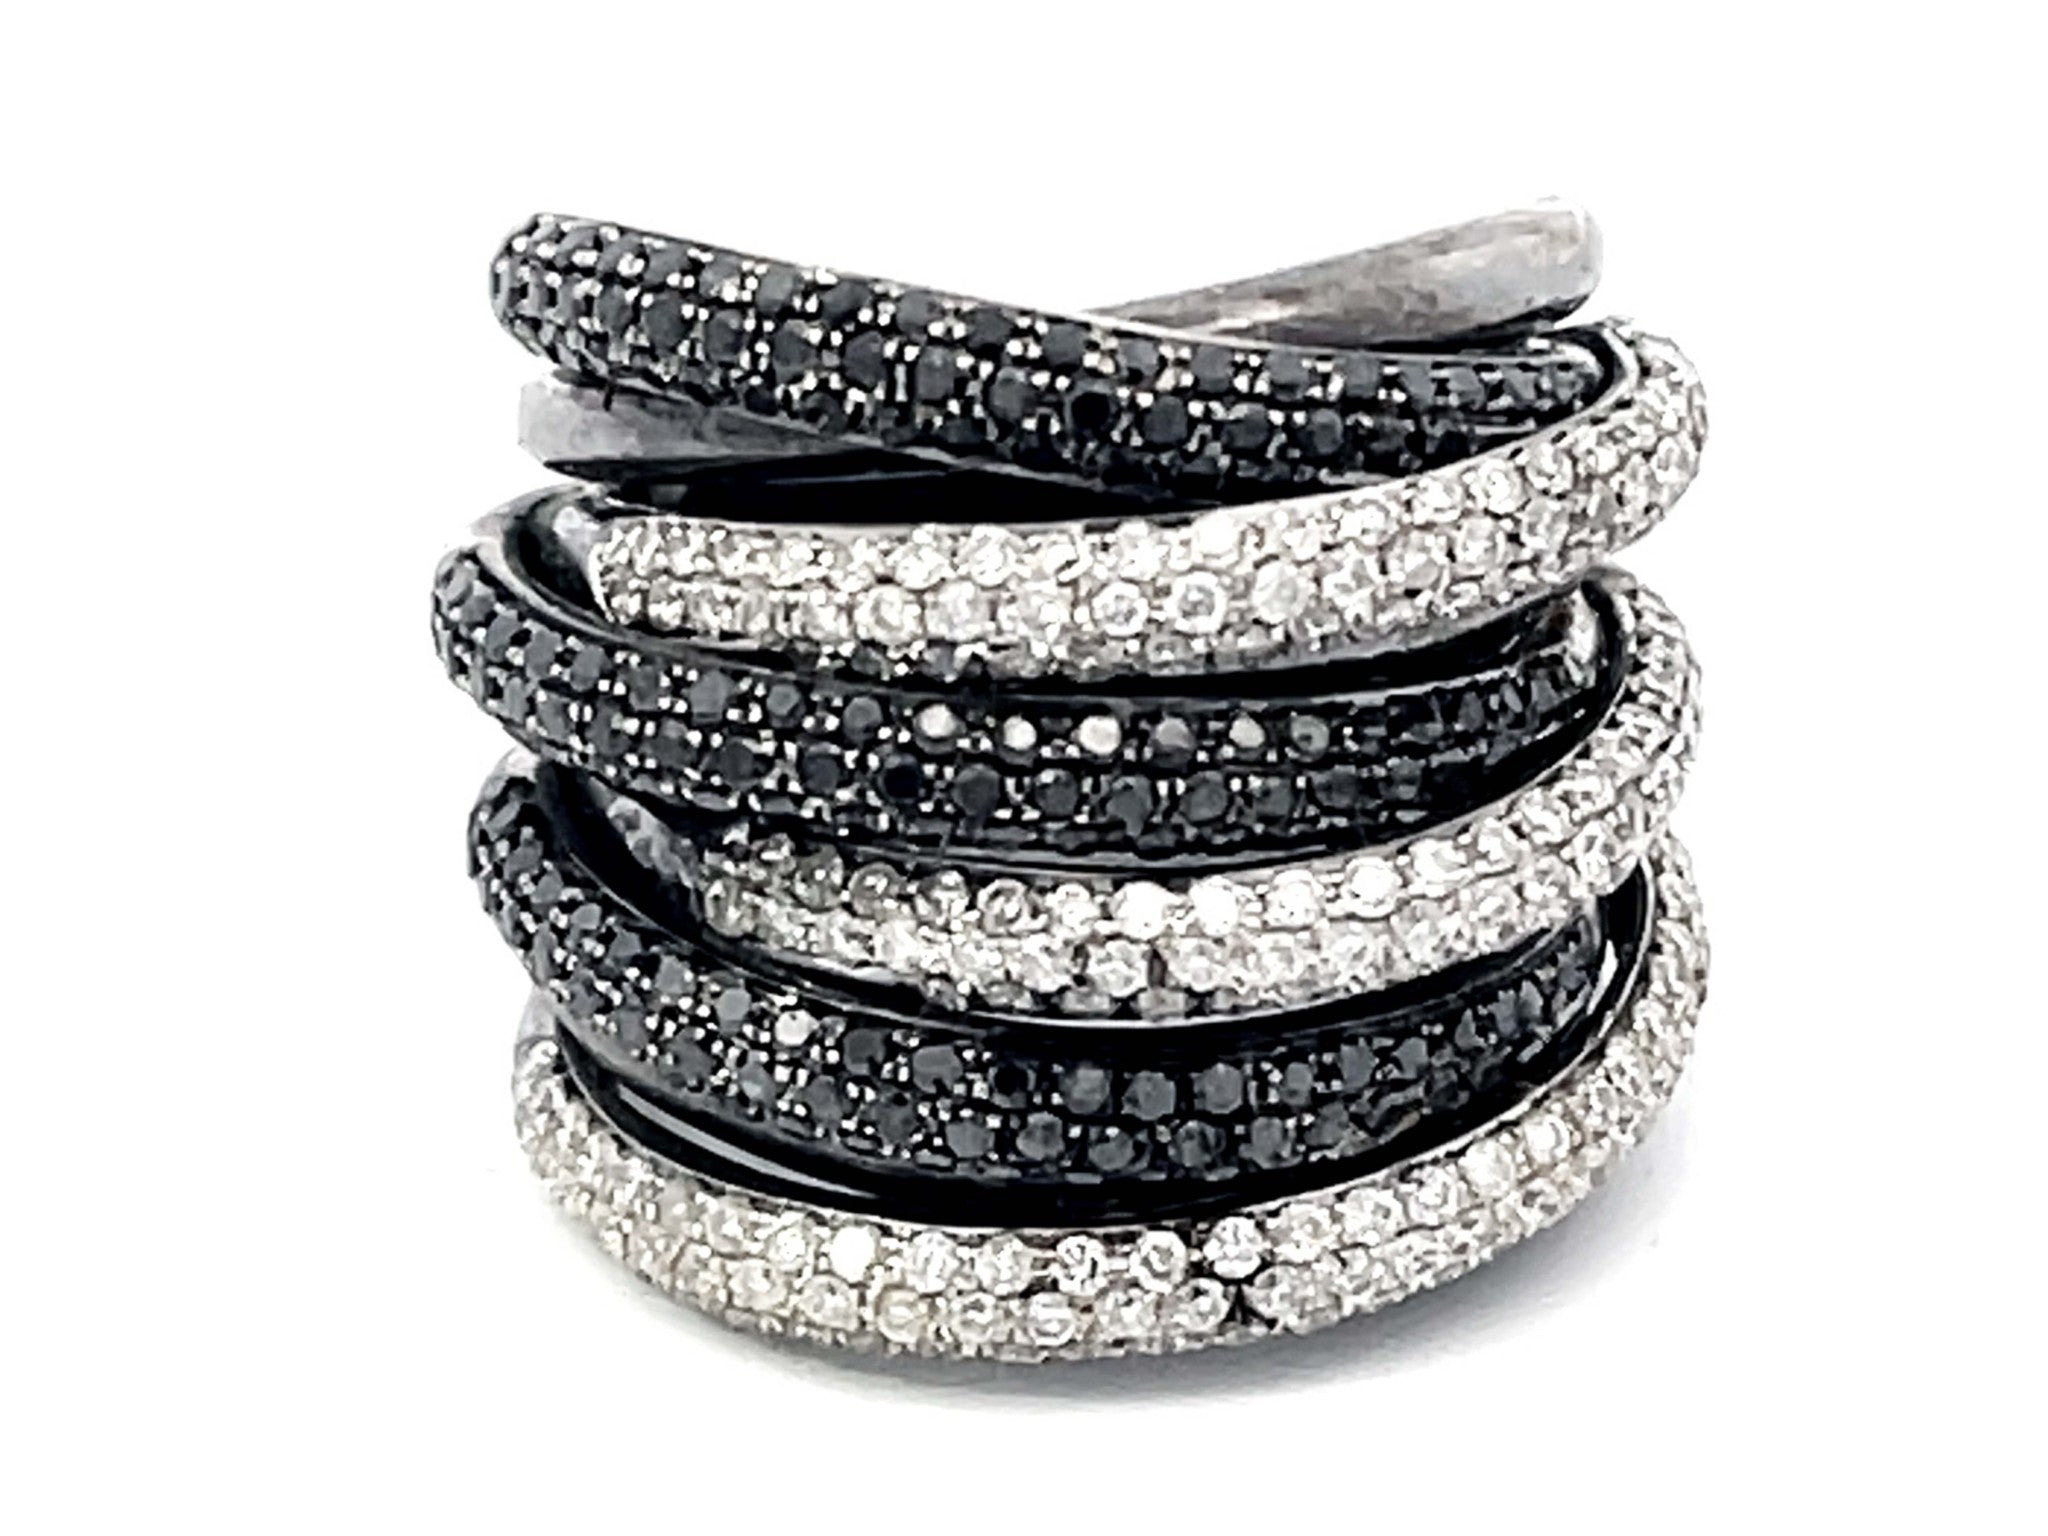 Wide Multi Row Diamond Band Ring in 14k Black Gold